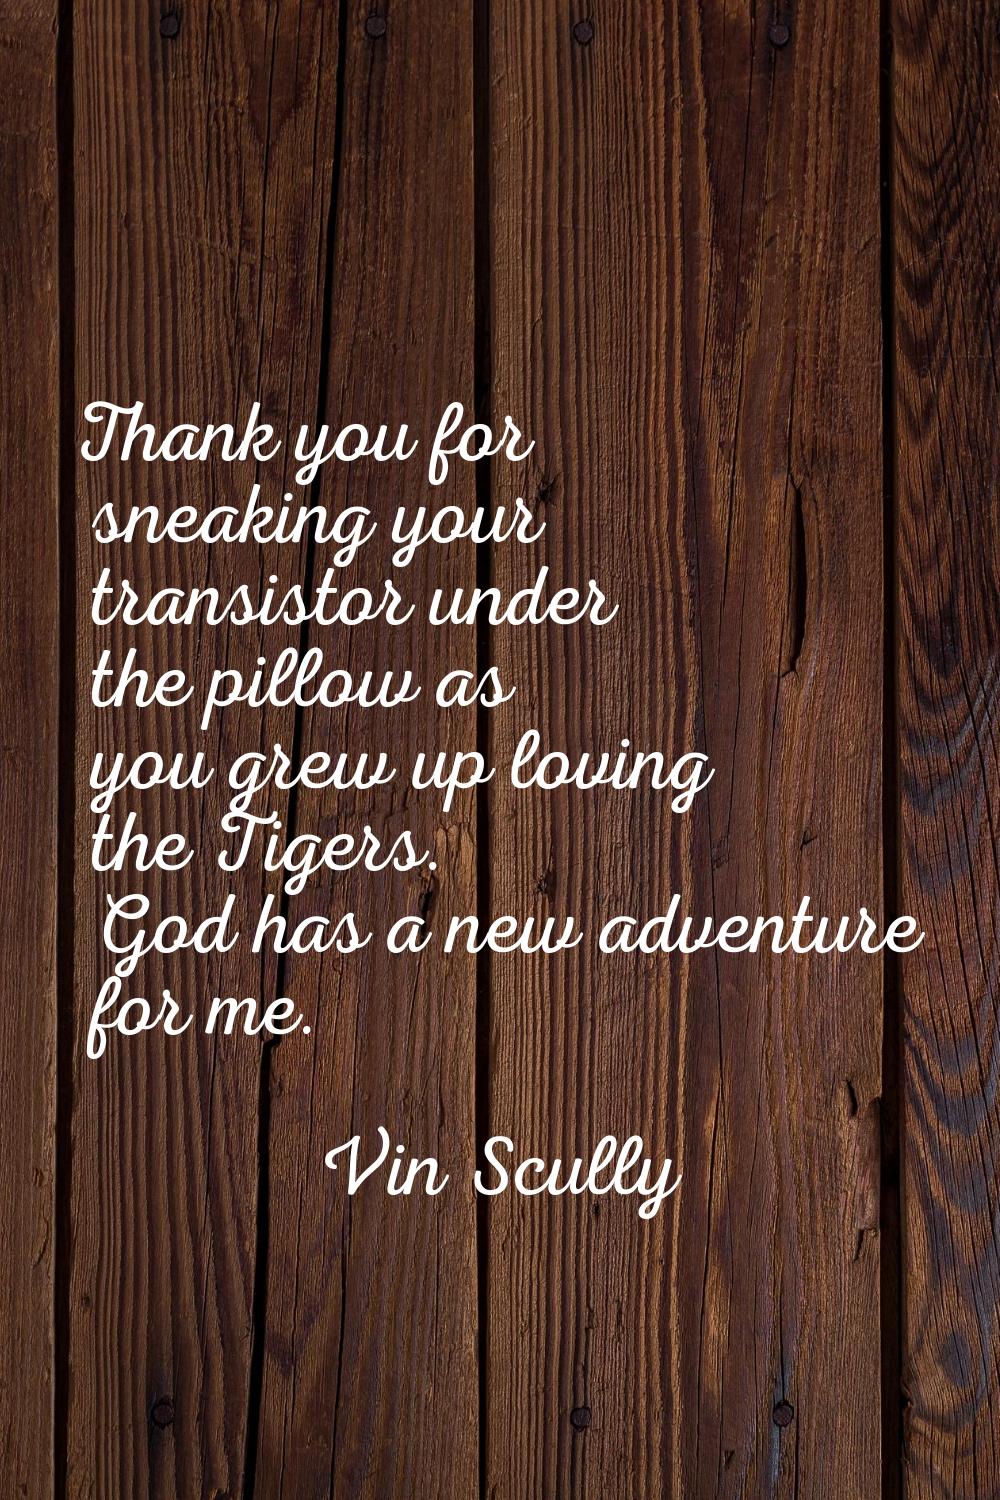 Thank you for sneaking your transistor under the pillow as you grew up loving the Tigers. God has a